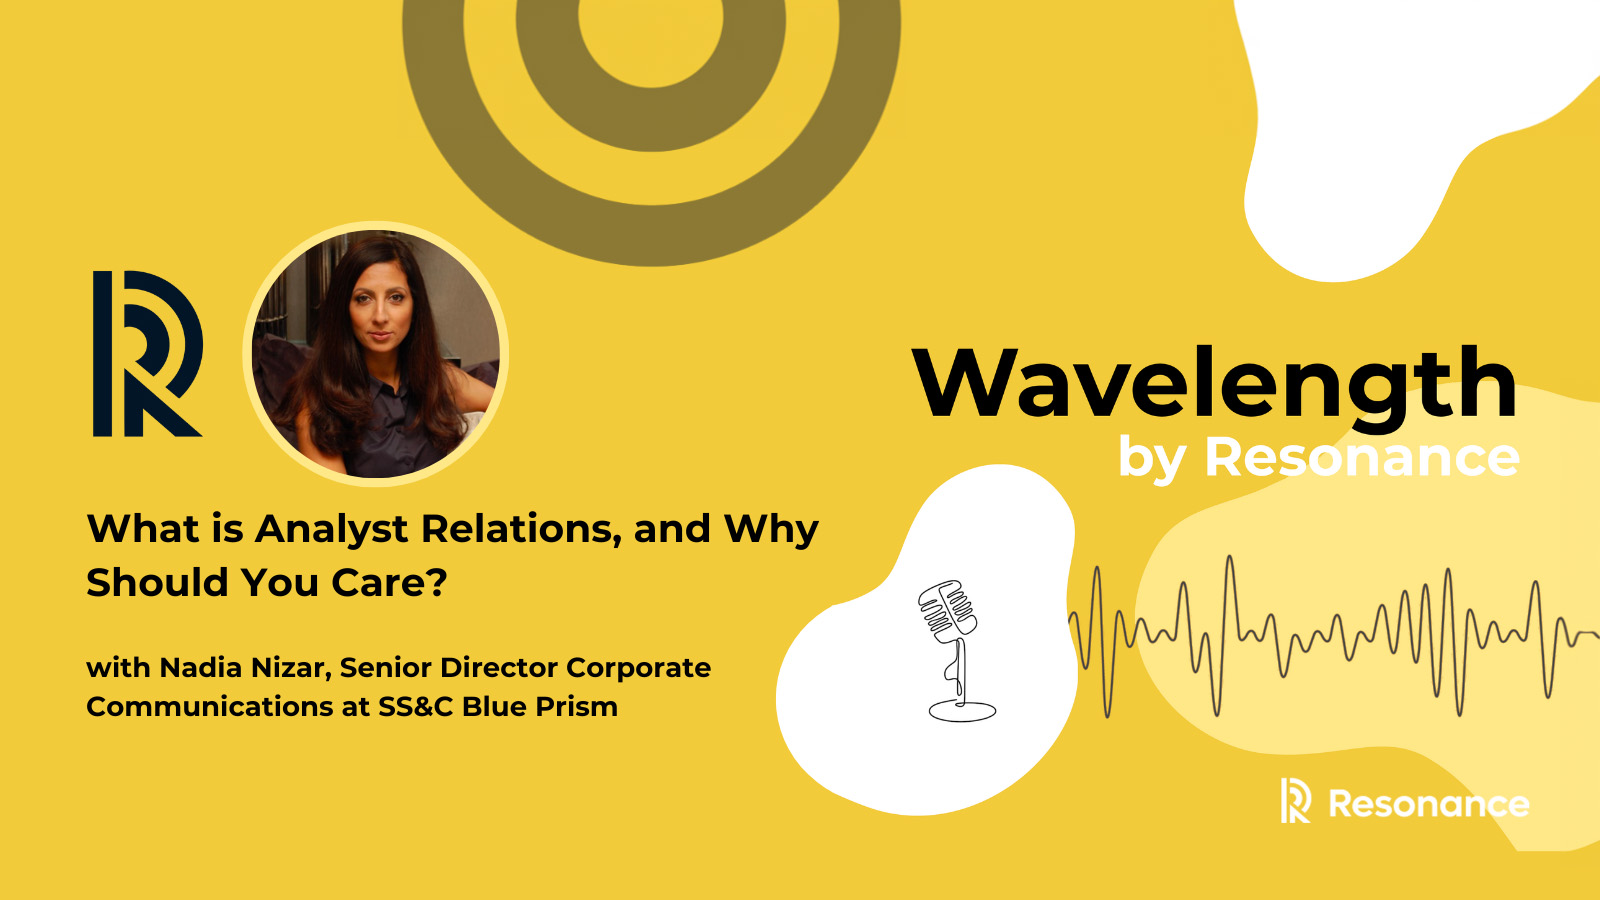 What is Analyst Relations, and Why Should You Care? with Nadia Nizar and Claire Williamson